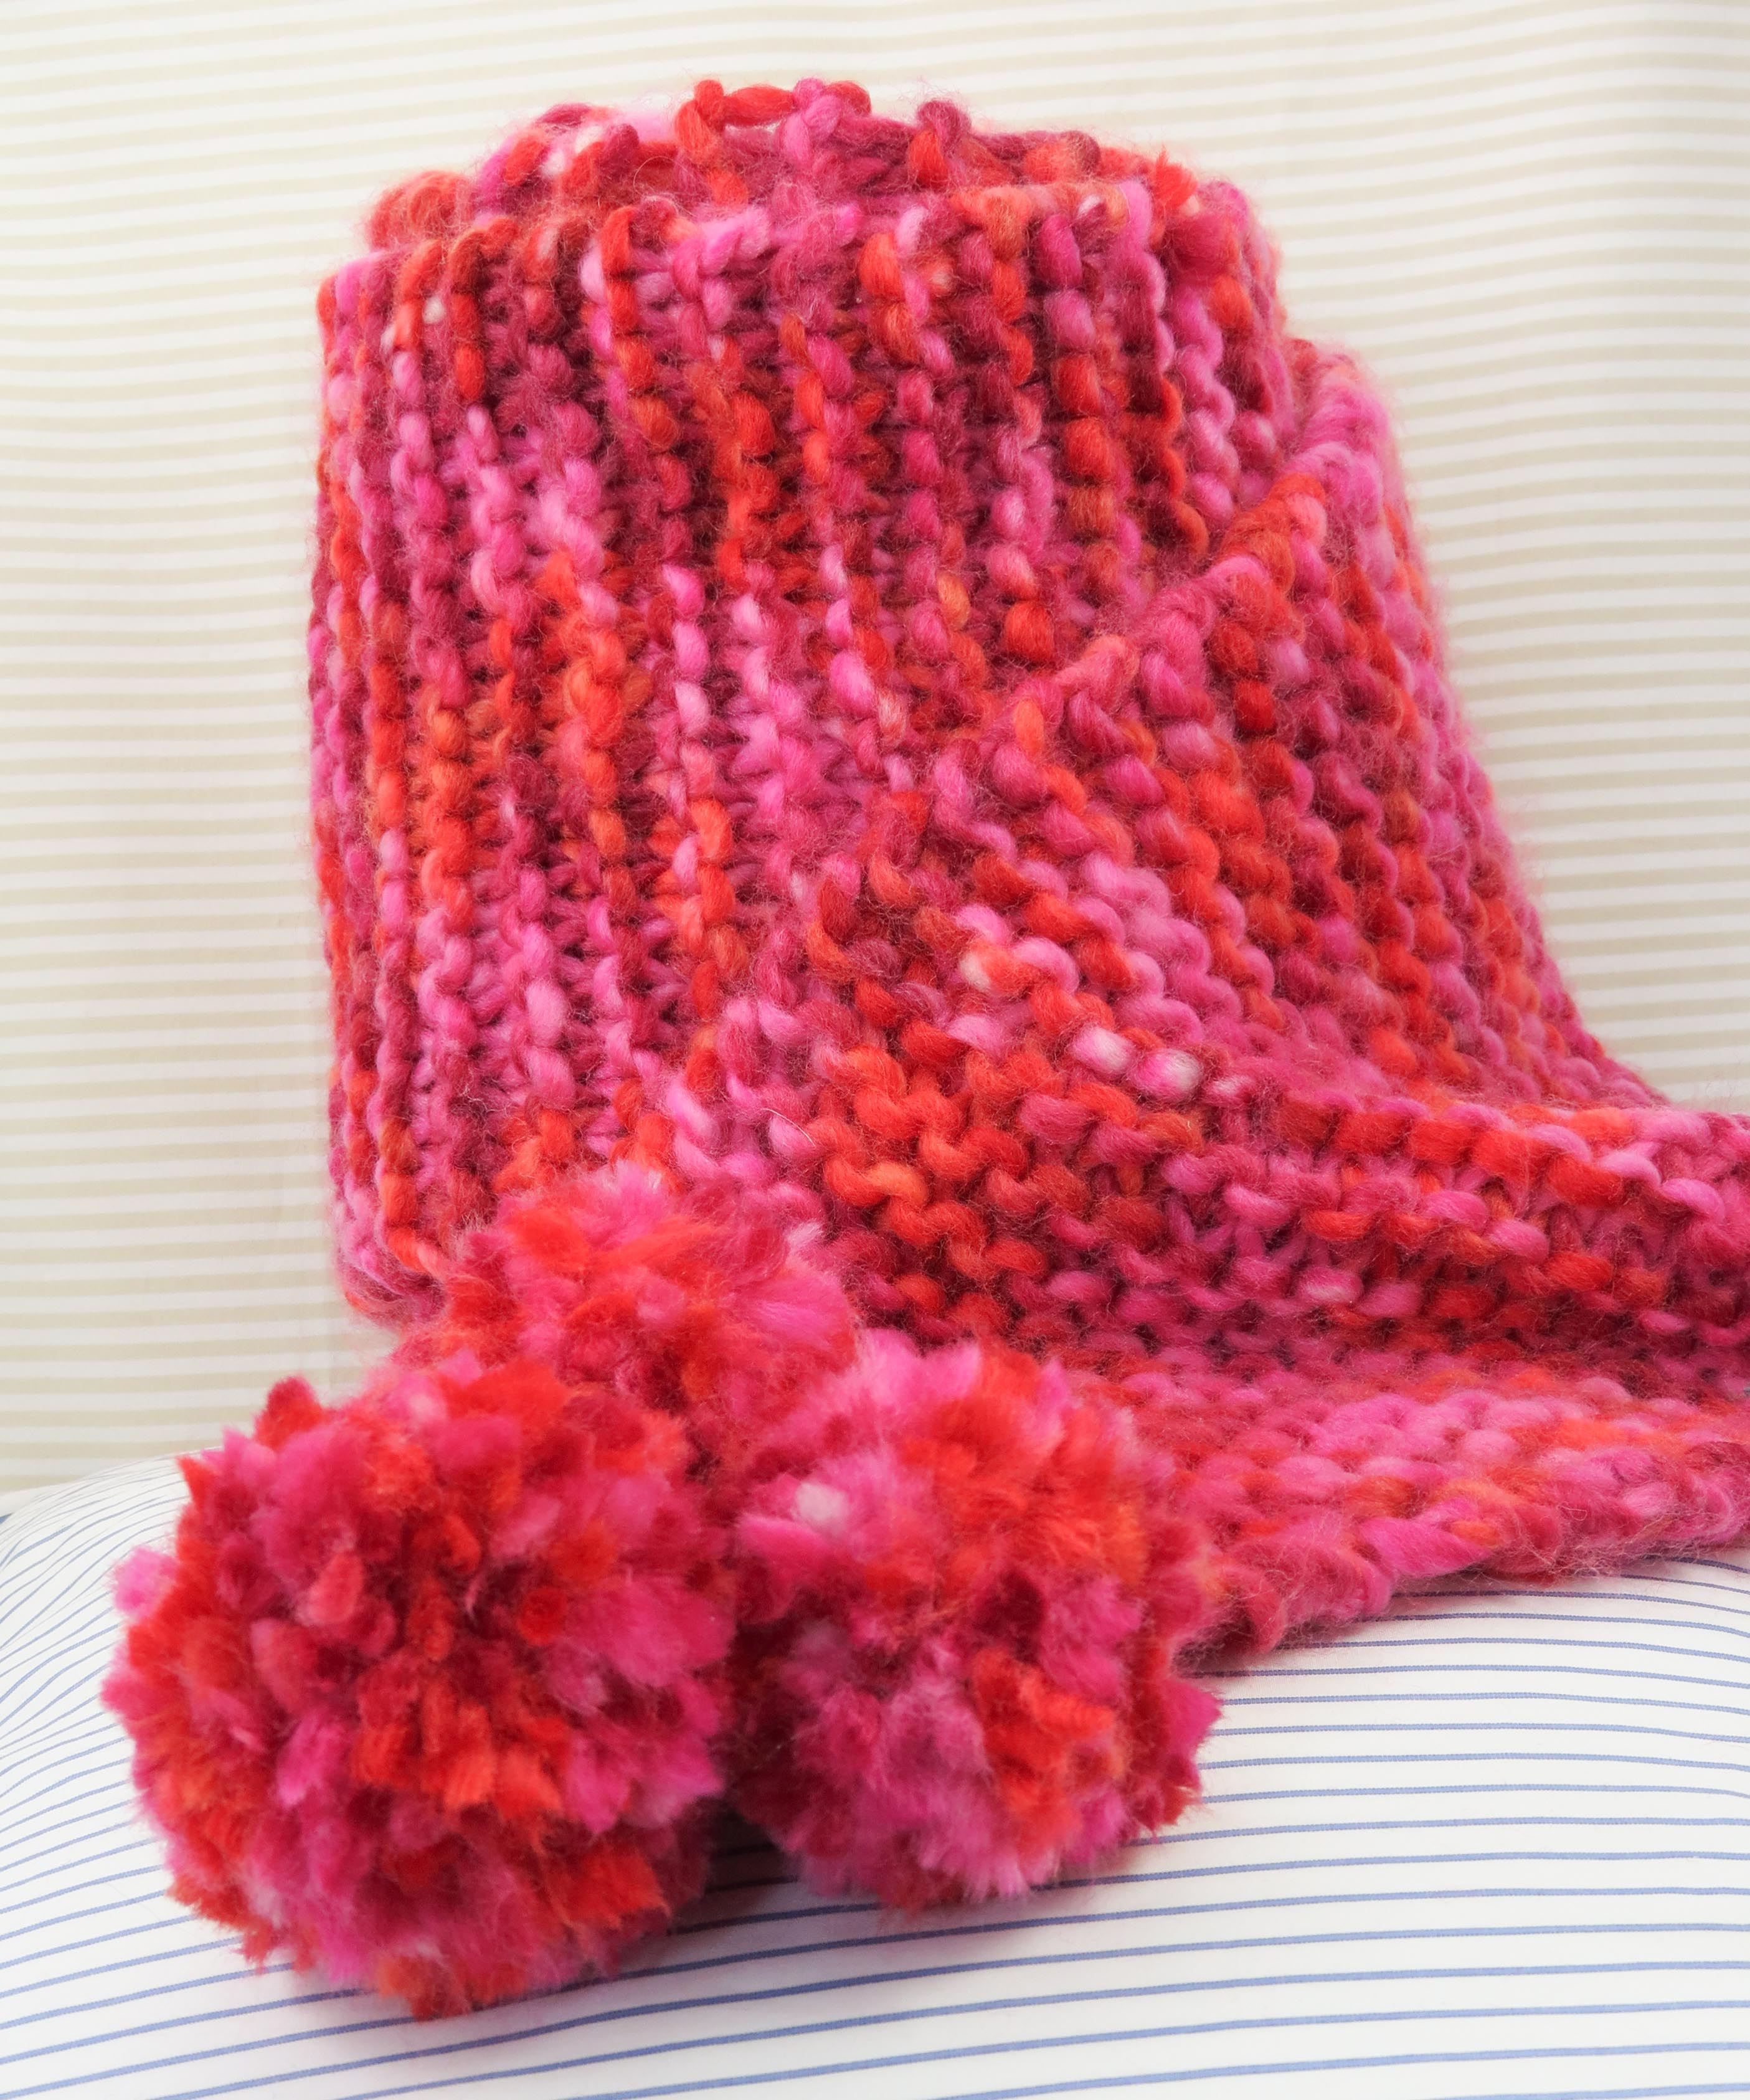 Basic Knitting Scarf Patterns Knit A Fabulous Pompom Scarf Easy Pattern To Download Buttonbag